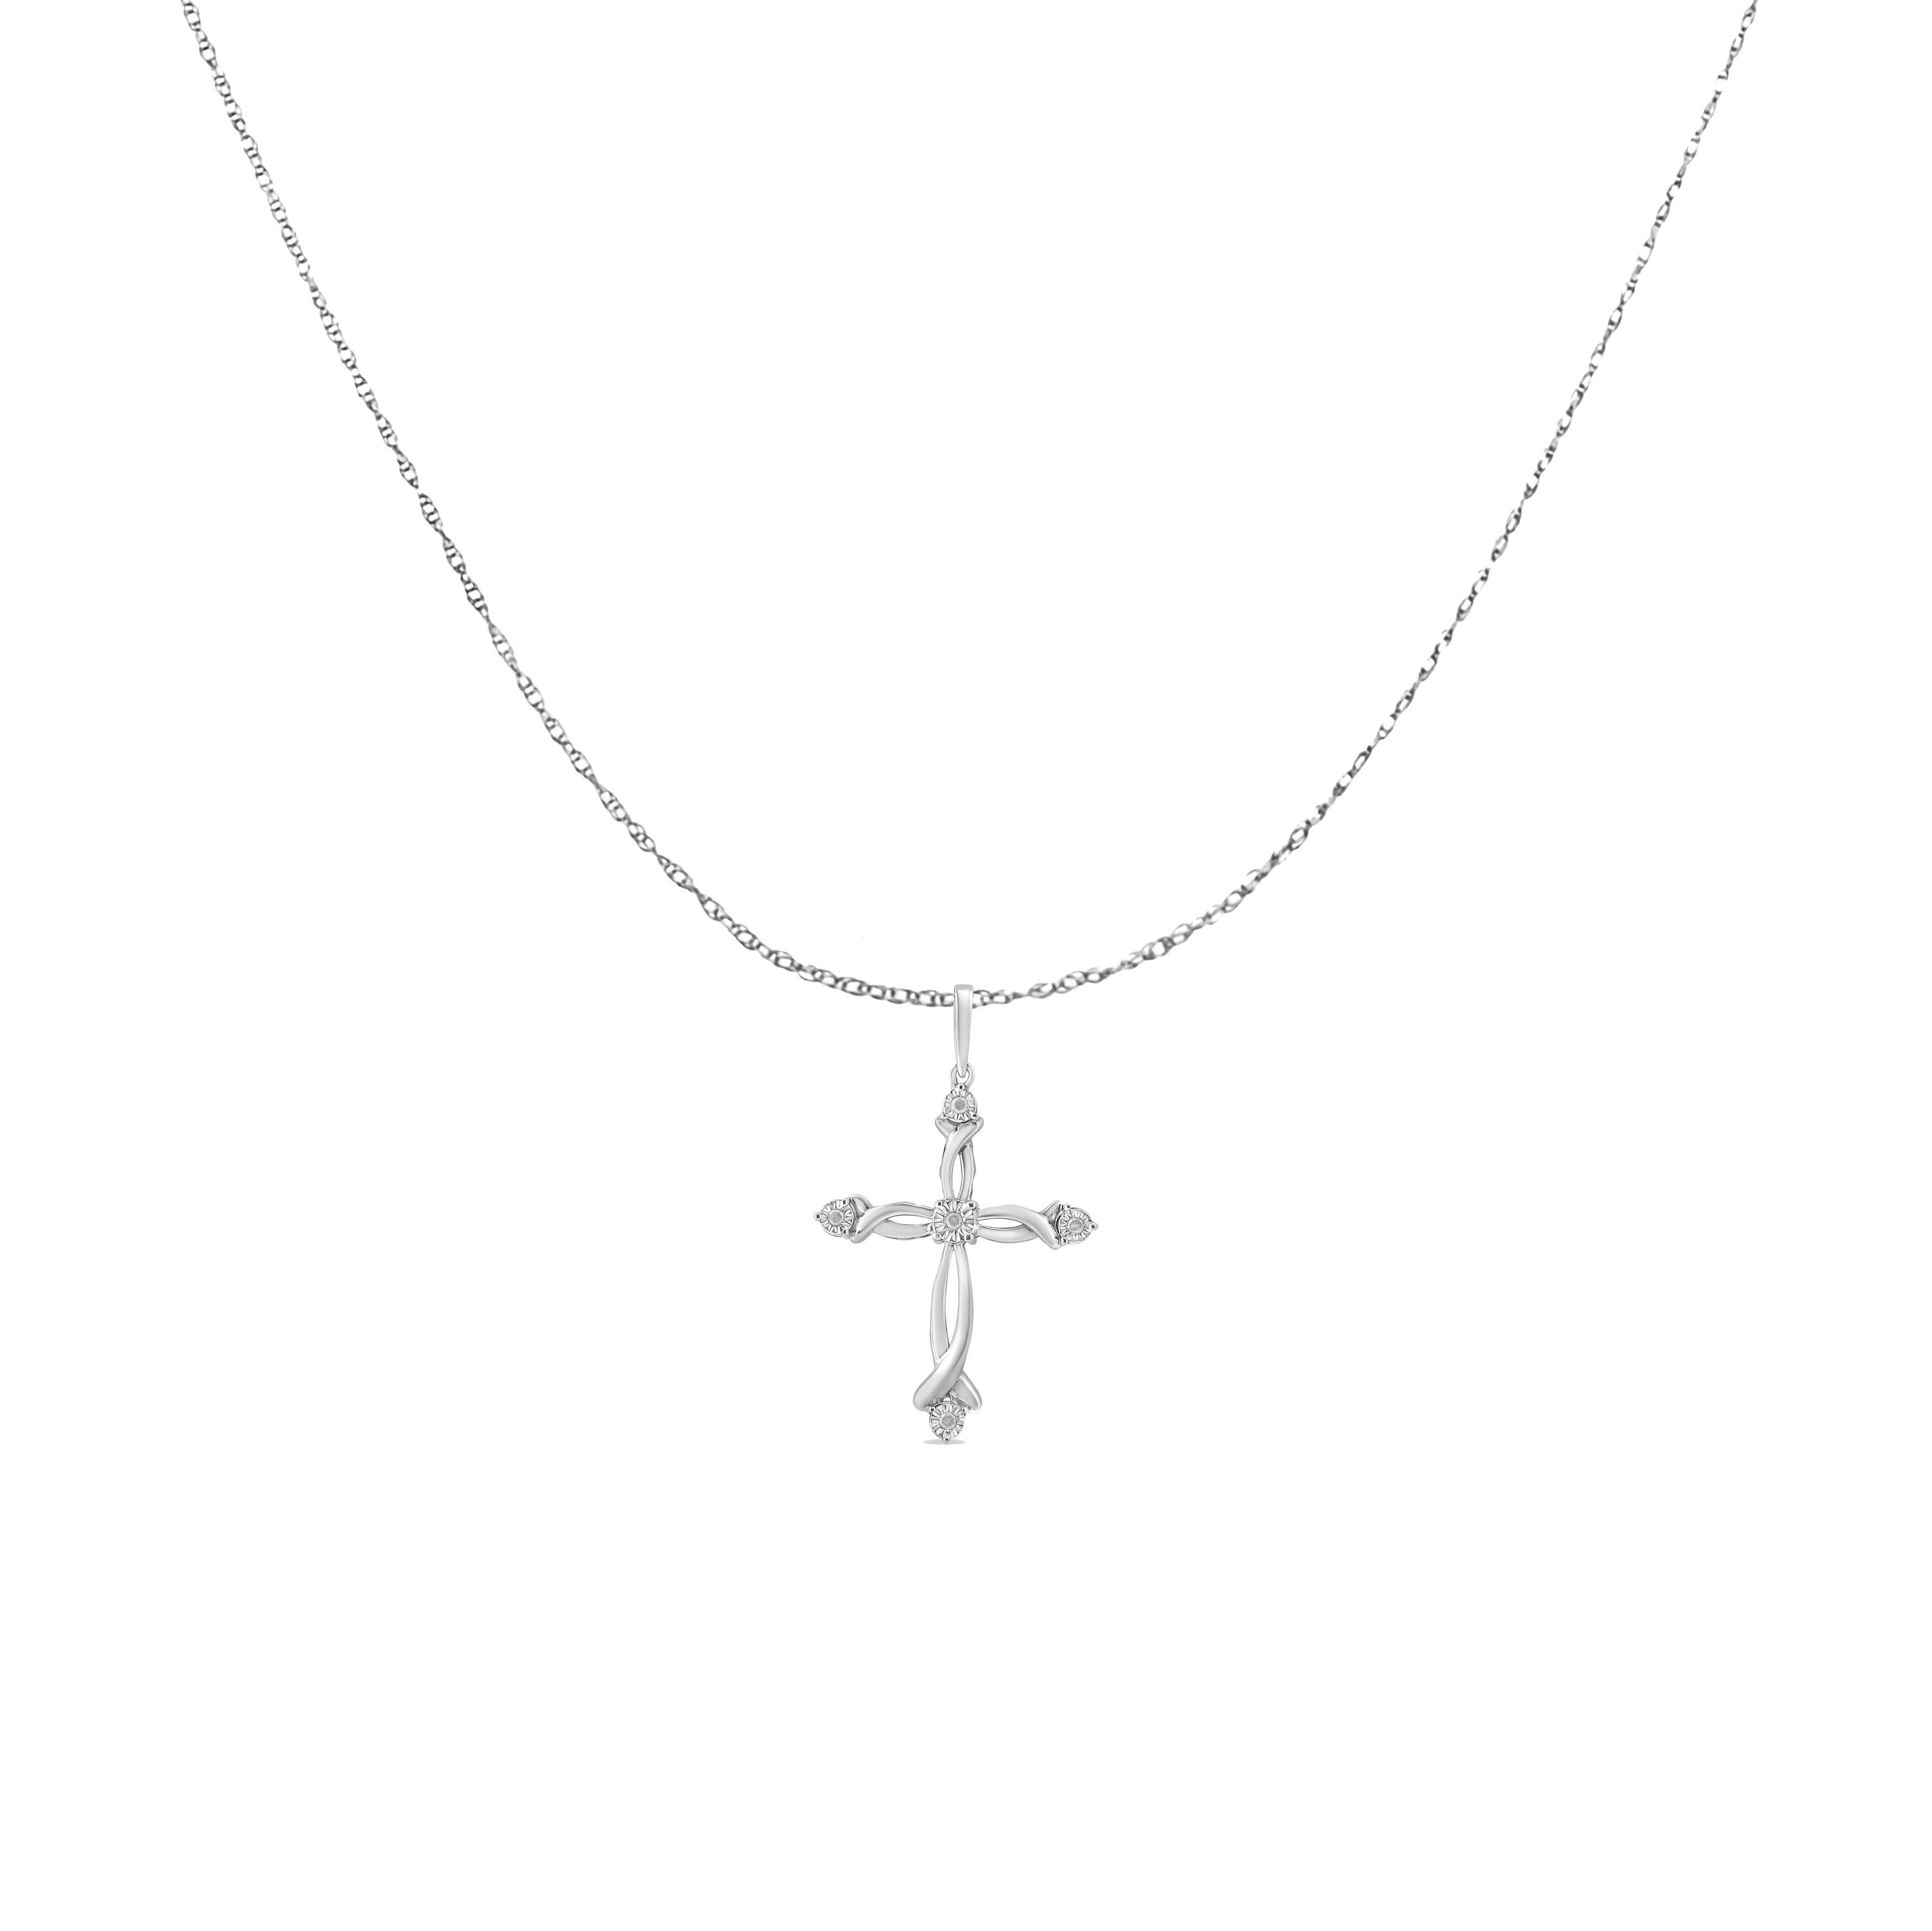 A simple and sober entwined cross pendant hangs on a rope chain. Five natural, sparkling round shape diamonds adorn the ends and center of this lovely sterling silver pendant. The diamonds are rose-cut, promotional quality diamonds. Promo quality